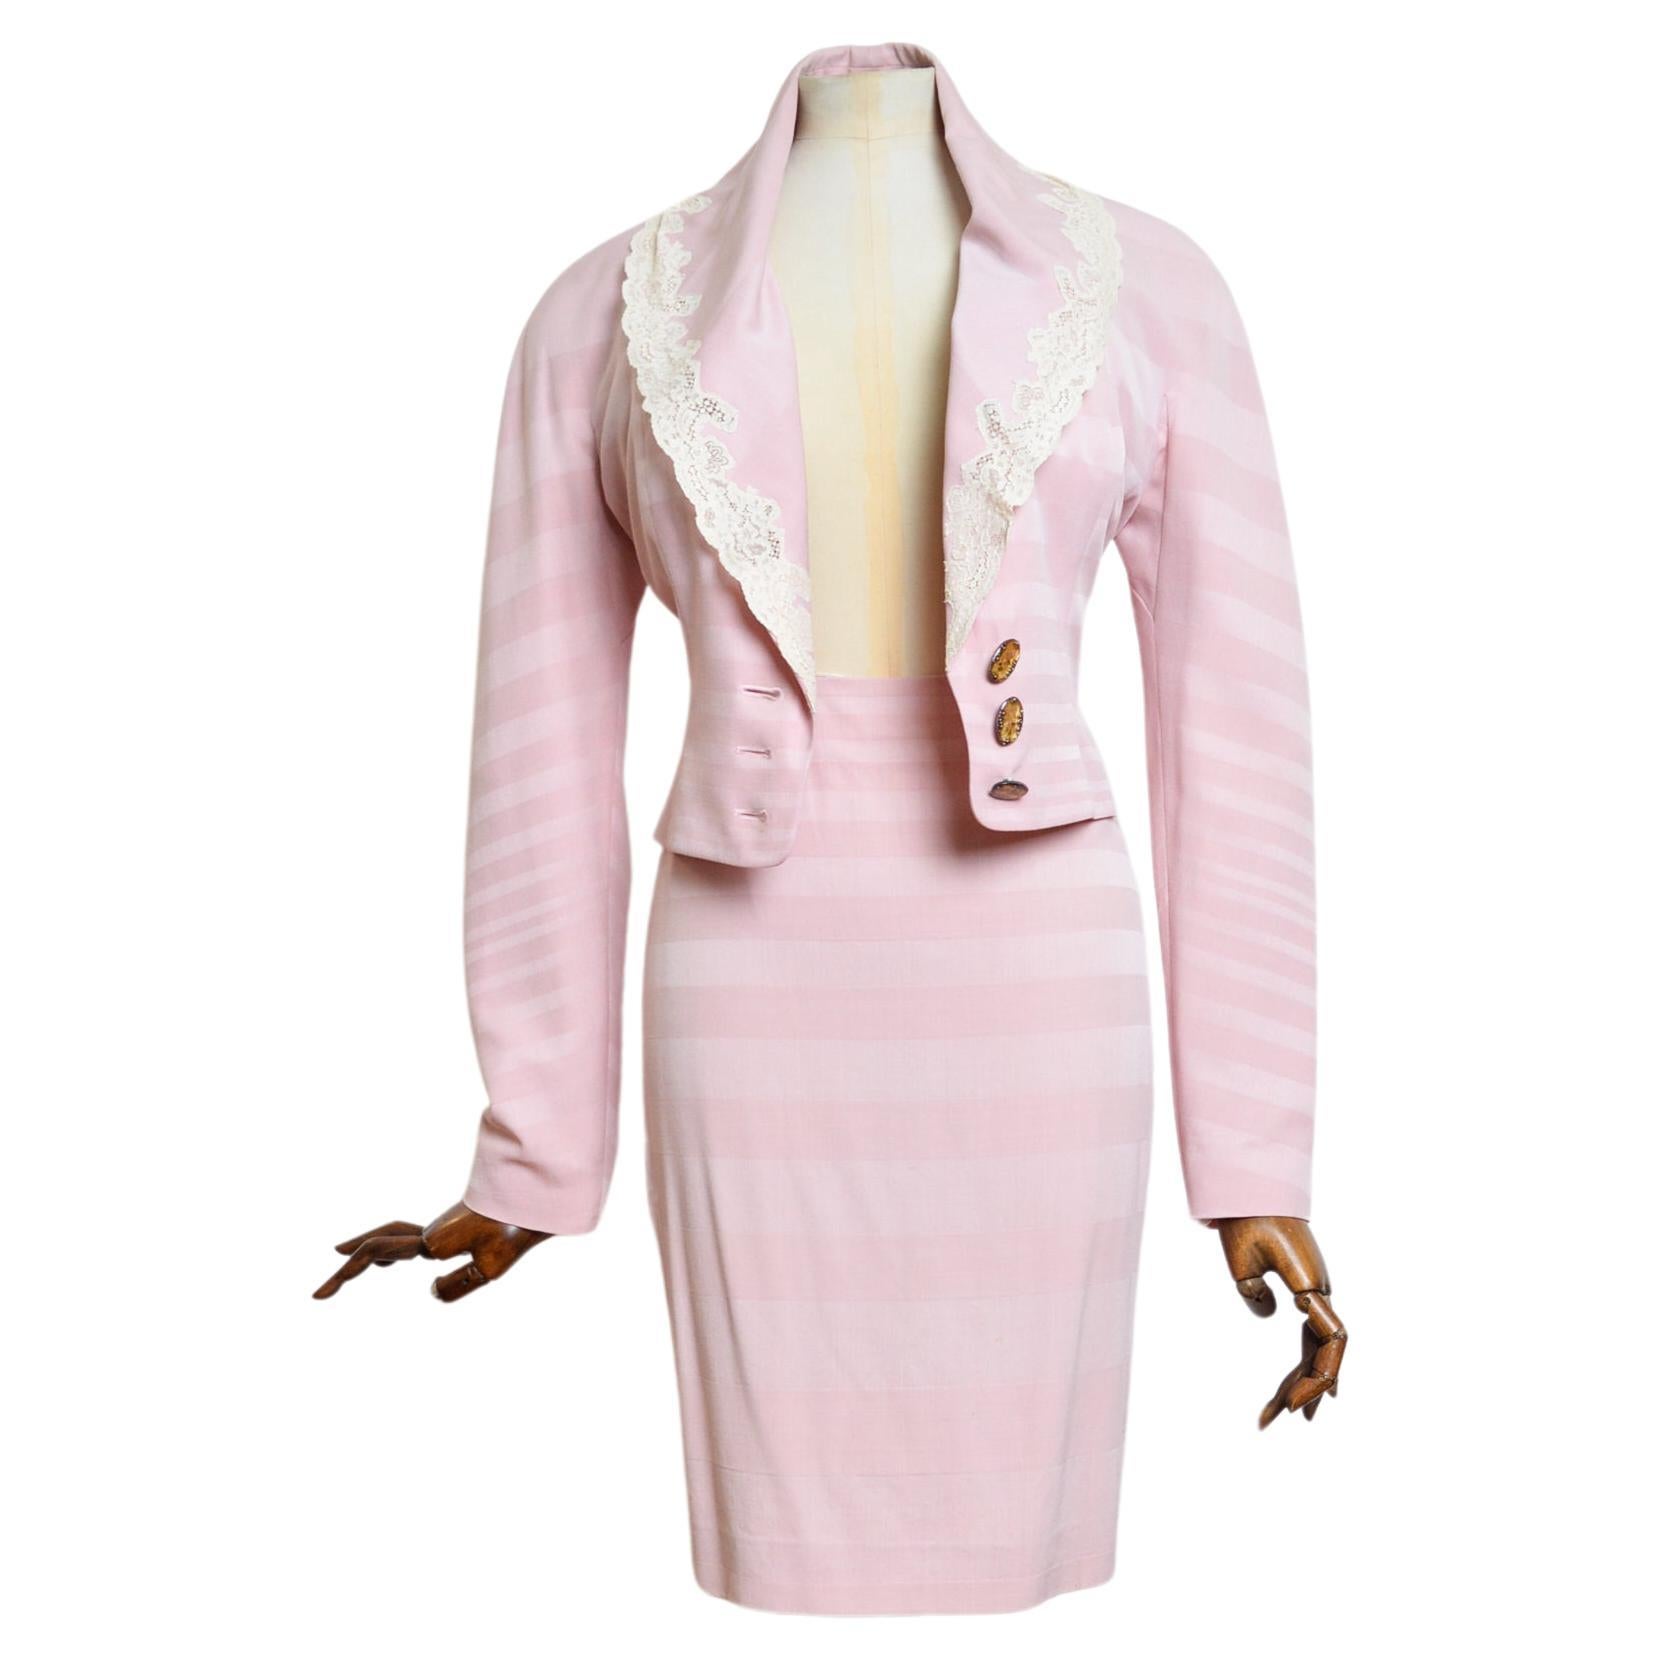 A/W 1999 Christian Dior by John Galliano Pink Lace Jacket & Pencil Skirt set